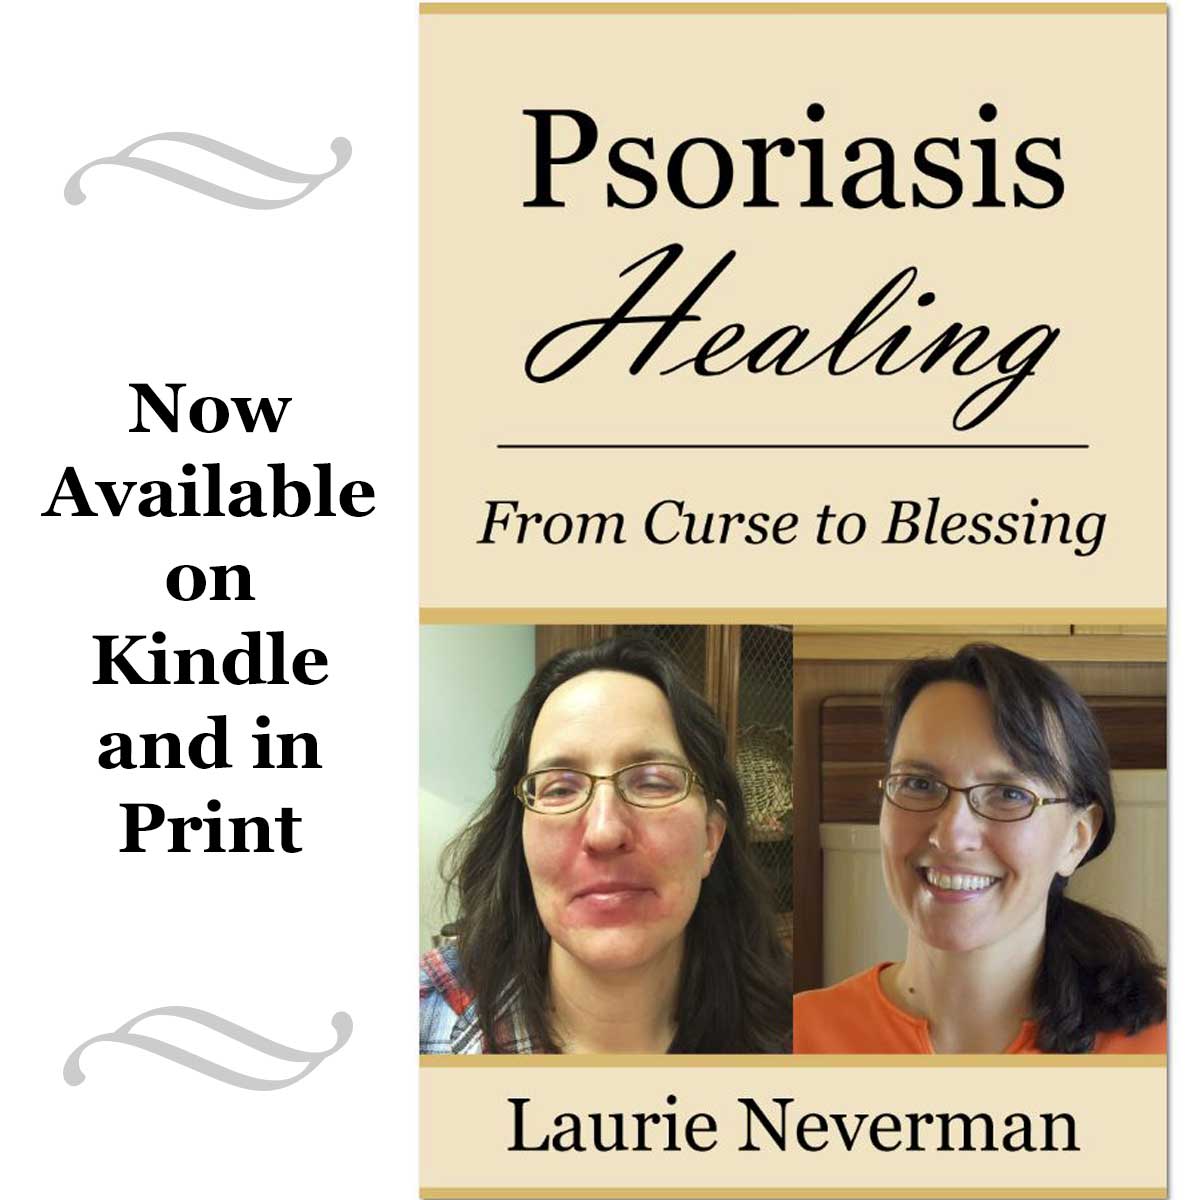 "Psoriasis Healing: From Curse to Blessing" book cover